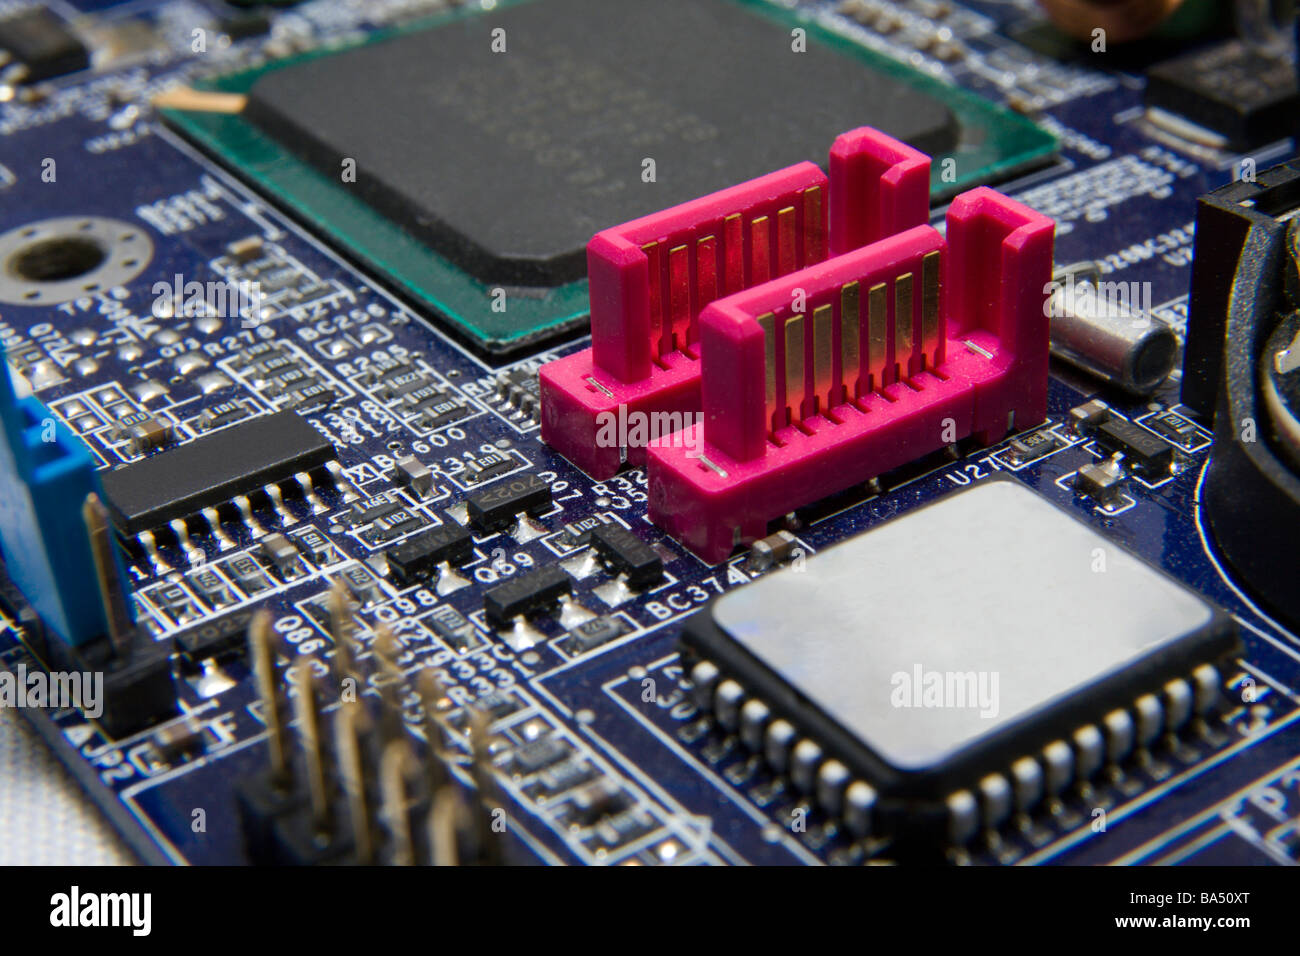 Computer motherboard detail with SATA connectors. Stock Photo